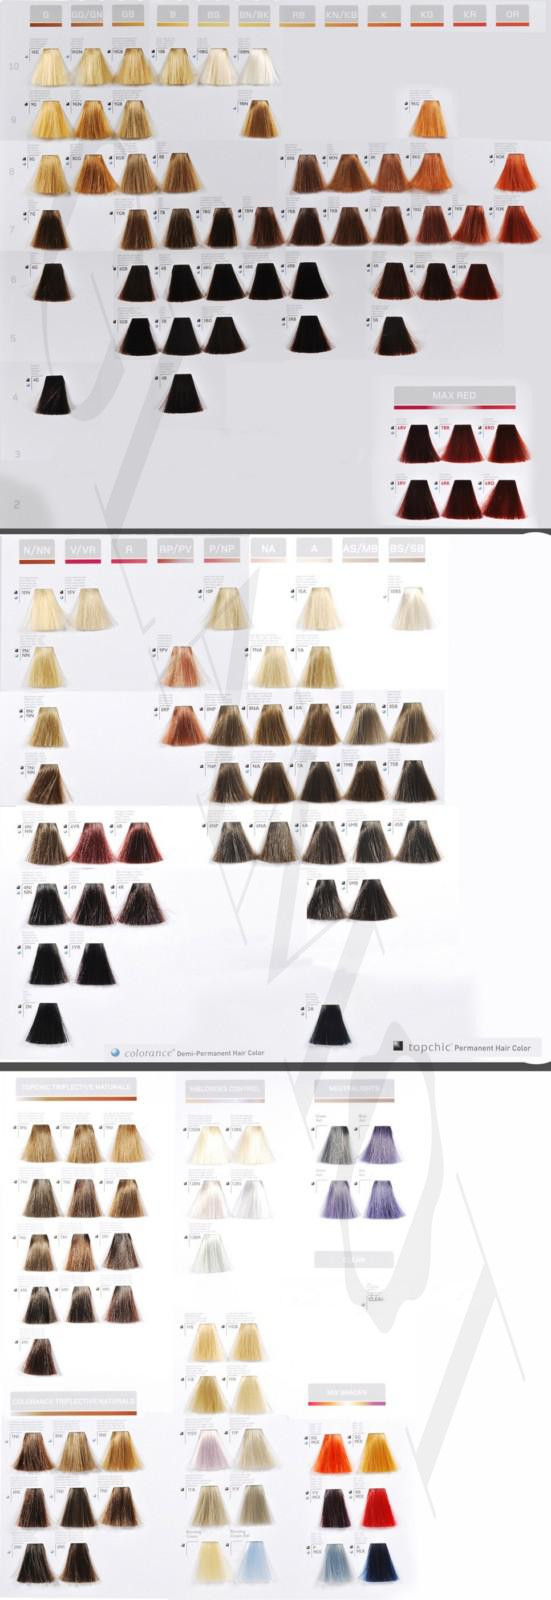 Goldwell Colorance Color Chart 2018